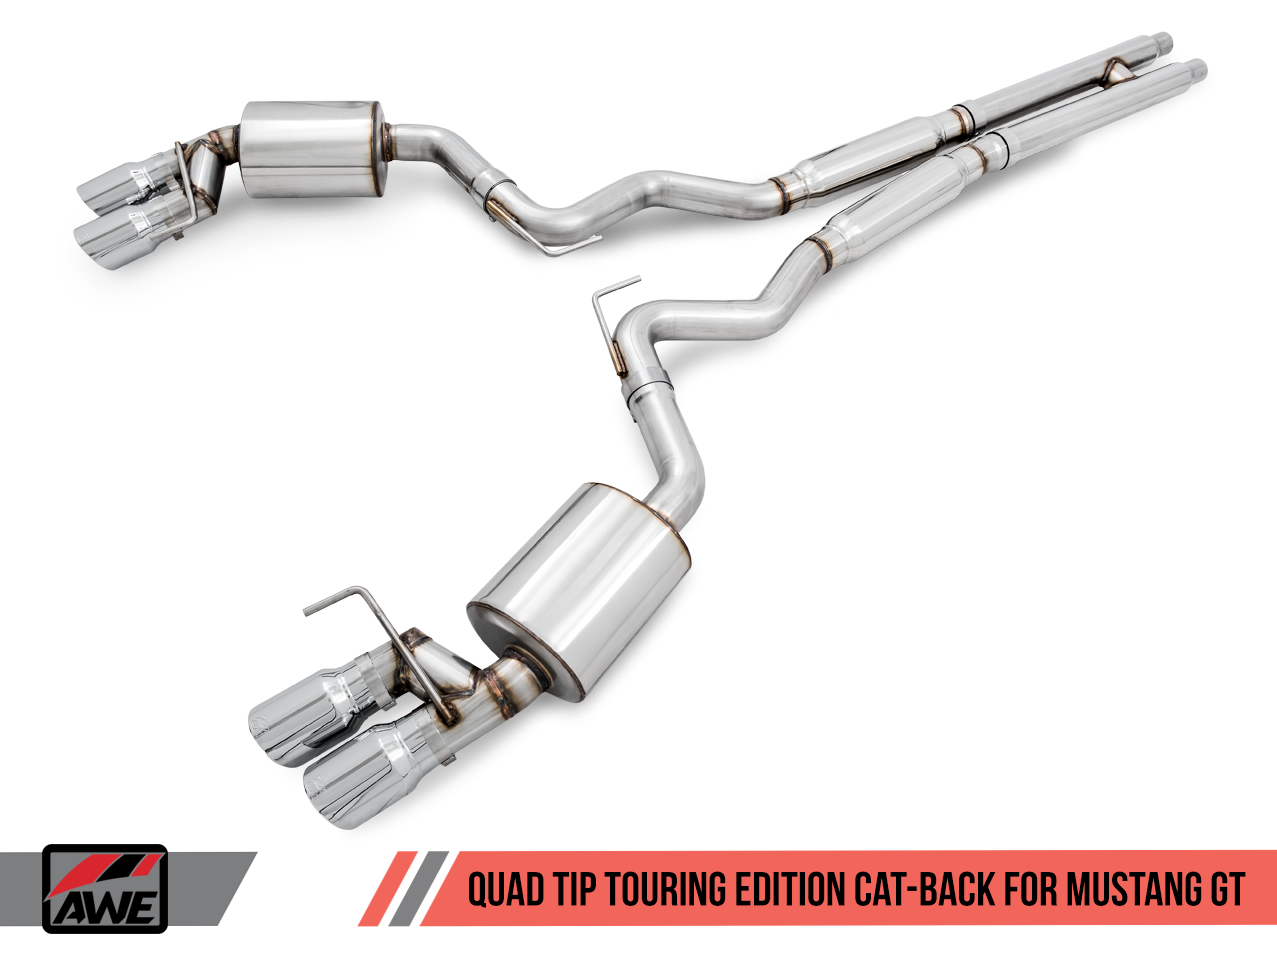 AWE Touring Edition Cat-back Exhaust for 15-17 S550 Mustang GT - Quad Outlet - No Tips (GT350 Valance) 3015-41006